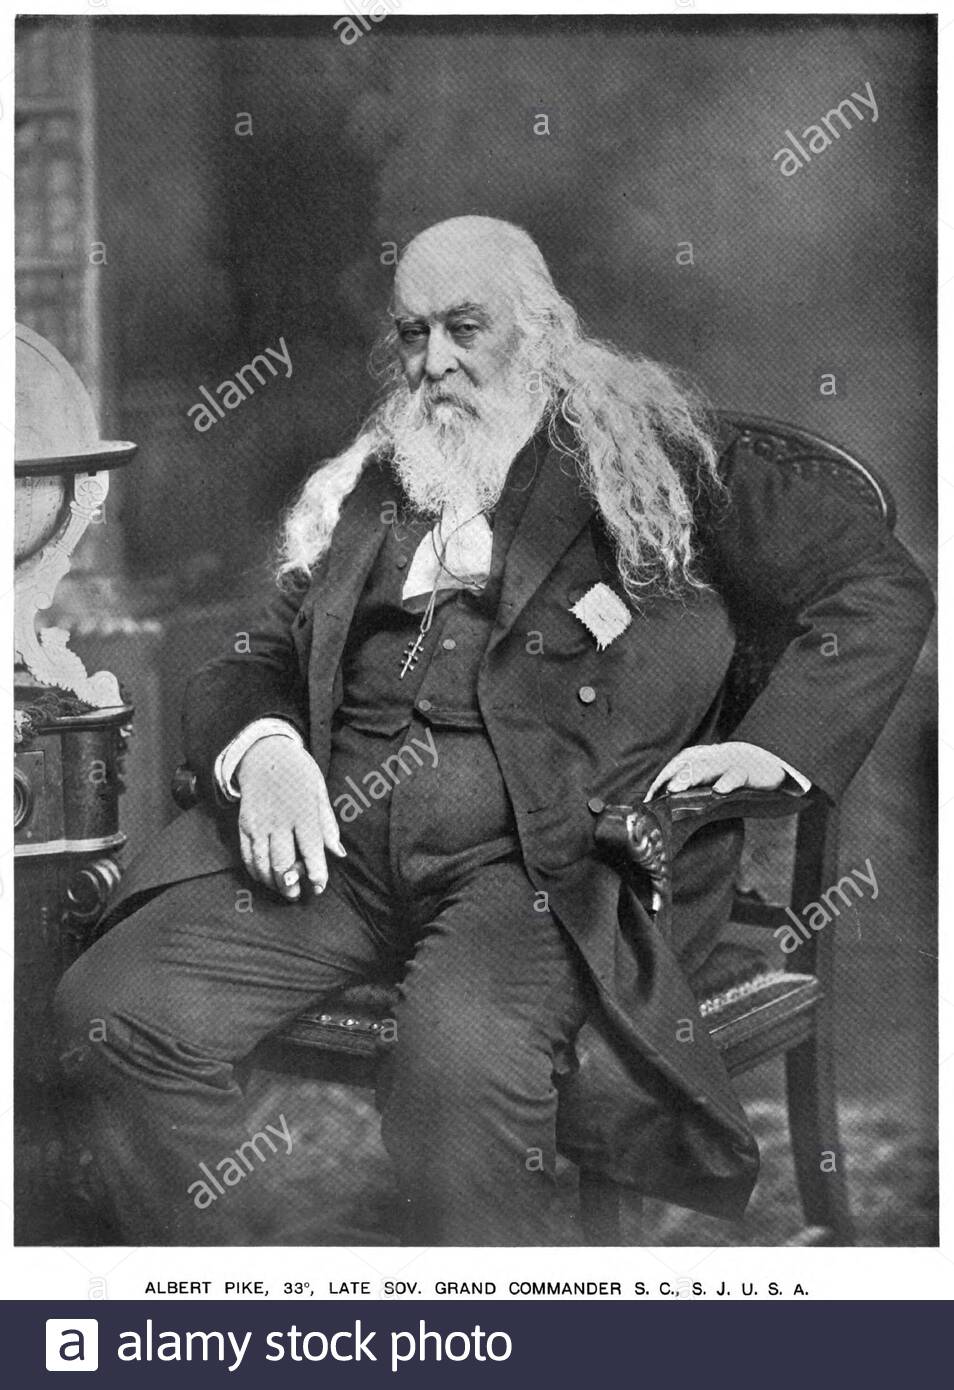 Albert Pike portrait, 1809 – 1891, was an American author, poet and Freemason Sovereign Grand Commander of the Scottish Rite's Southern Jurisdiction, he was also a senior officer of the Confederate States Army in the American Civil War, circa late 1800s Stock Photo